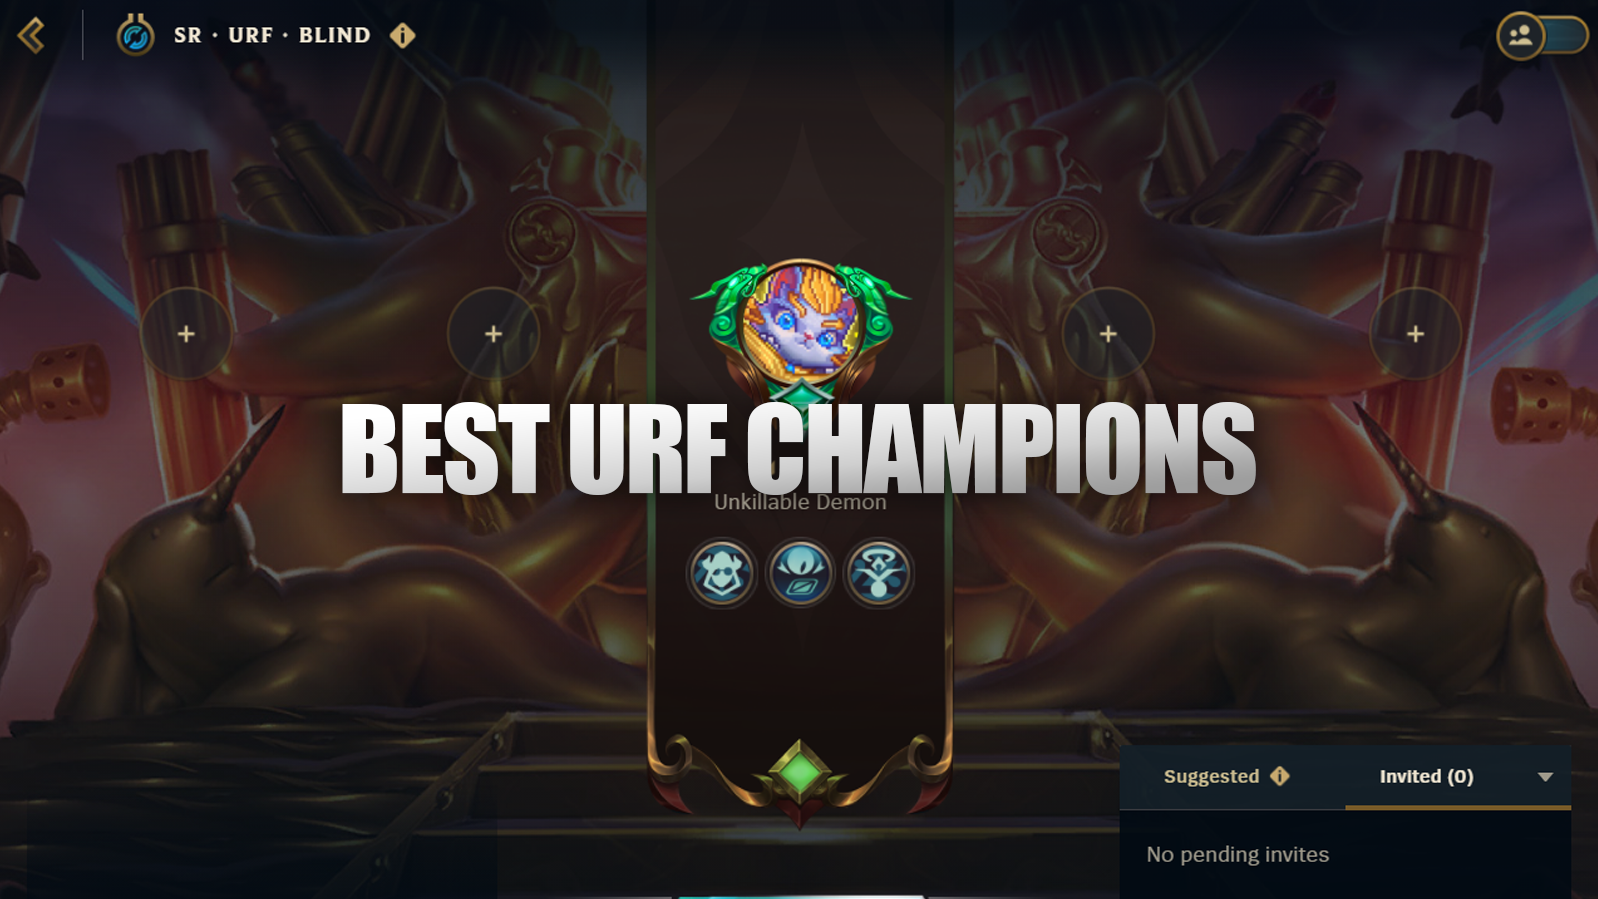 In Ultra Rapid Fire (URF), certain champions shine brighter than others thanks to their overloaded kits and ability to excel in chaos. The top-tier URF champions leverage their low-cooldown spells and abilities to secure early kills, deal insane burst damage, and ultimately snowball their way to victory.